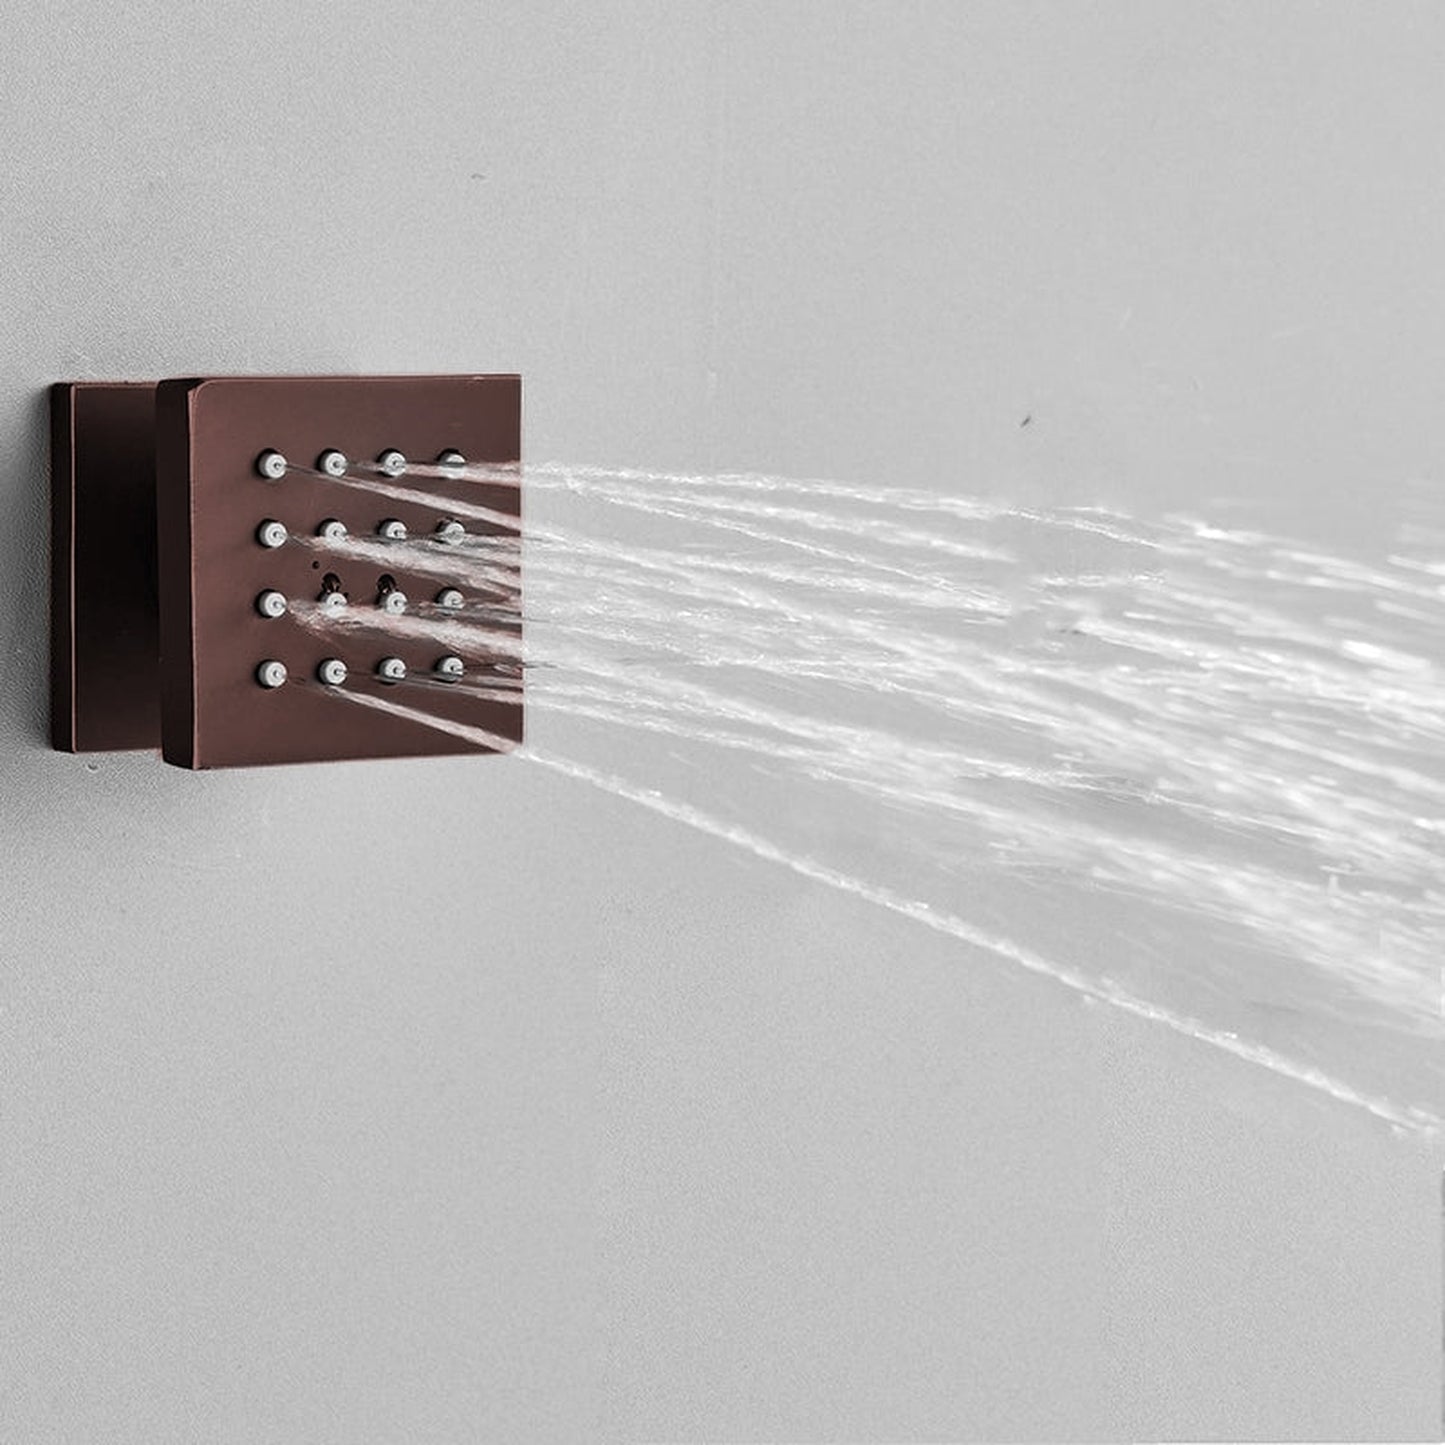 Fontana Sierra 20" Light Oil Rubbed Bronze Square Wall-Mounted LED Shower System With 6-Jet Body Sprays and Hand Shower